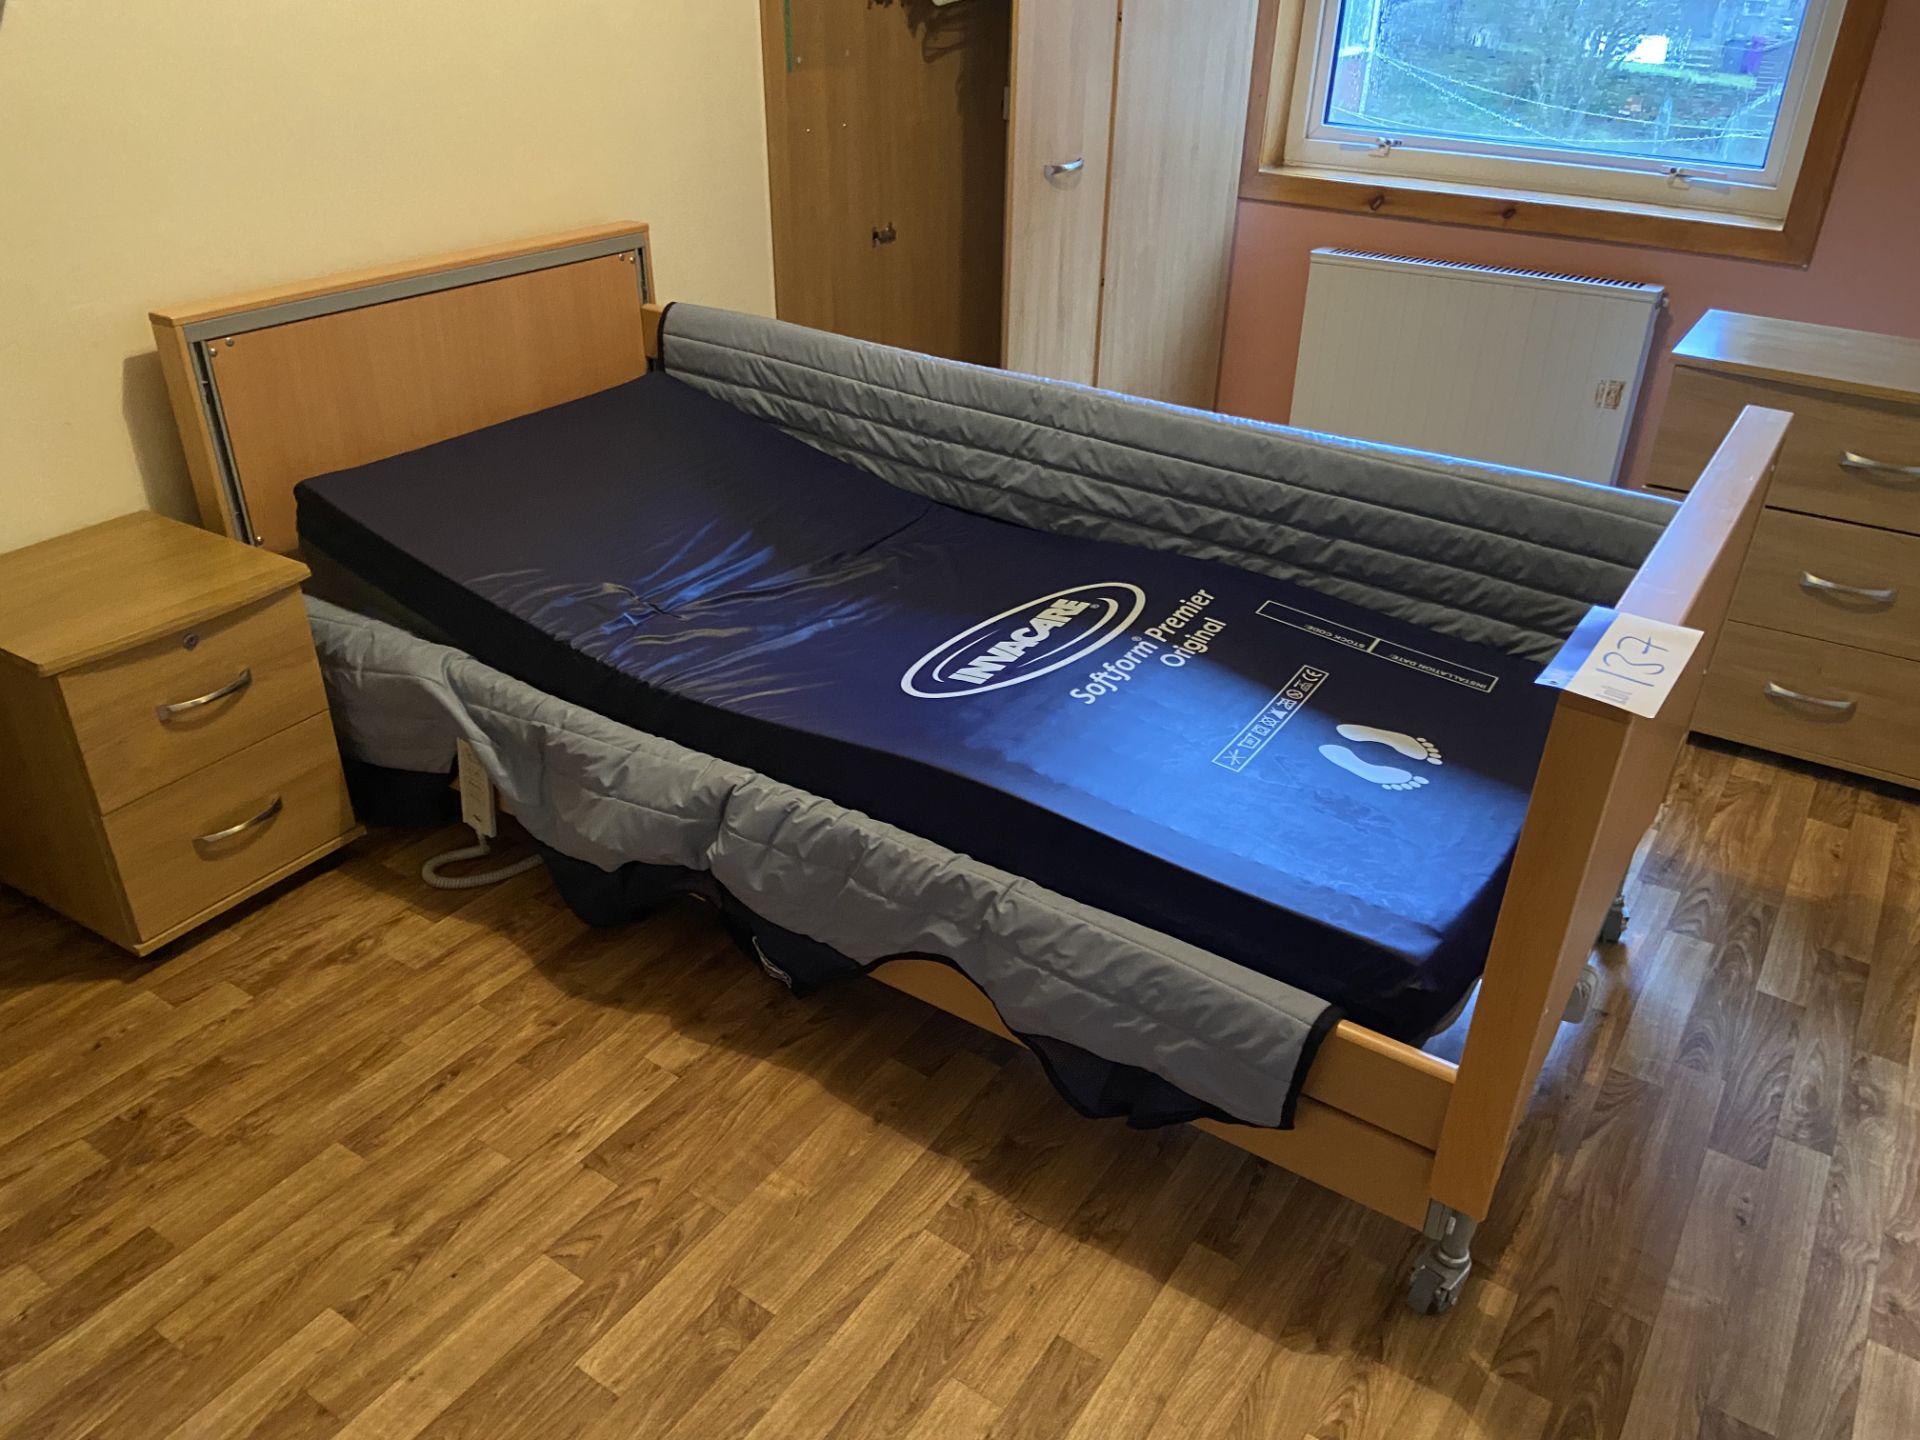 Invacare Mobile Adjustable Height Bed Frame, with Invacare soft foam premier mattress (Room 10)